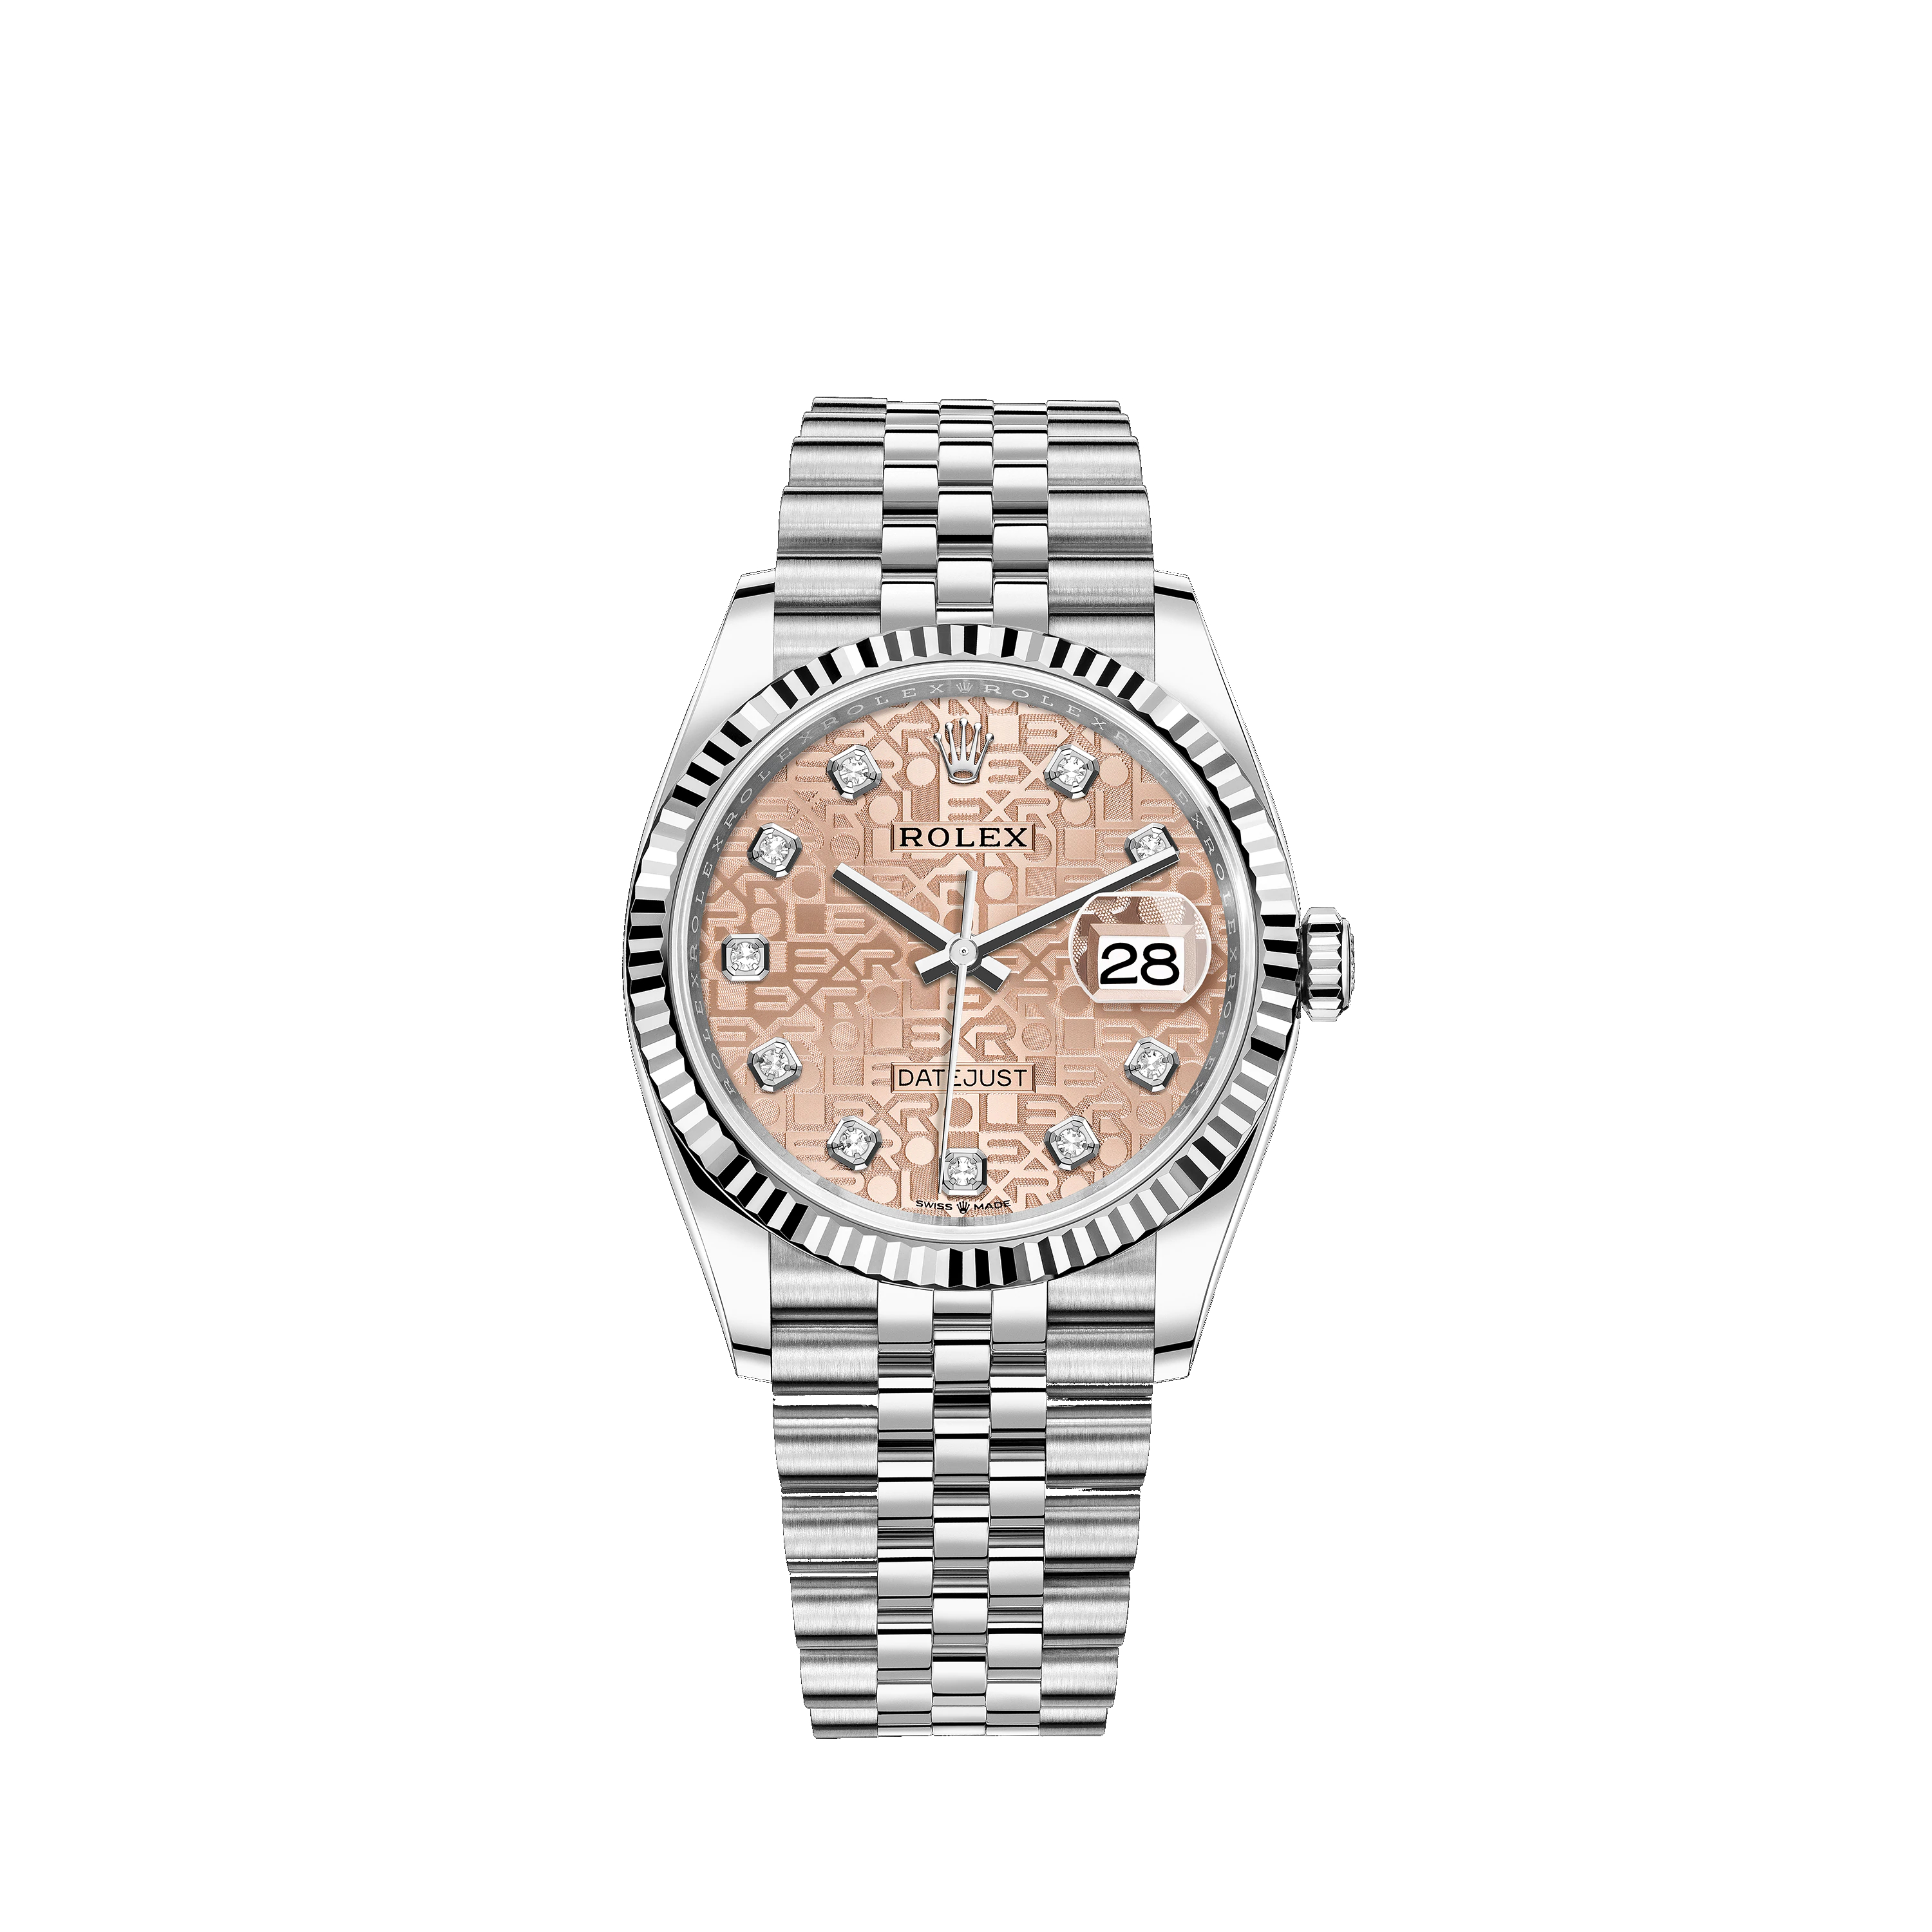 Datejust 36 126234 White Gold & Stainless Steel Watch (Pink Jubilee Design Set with Diamonds)